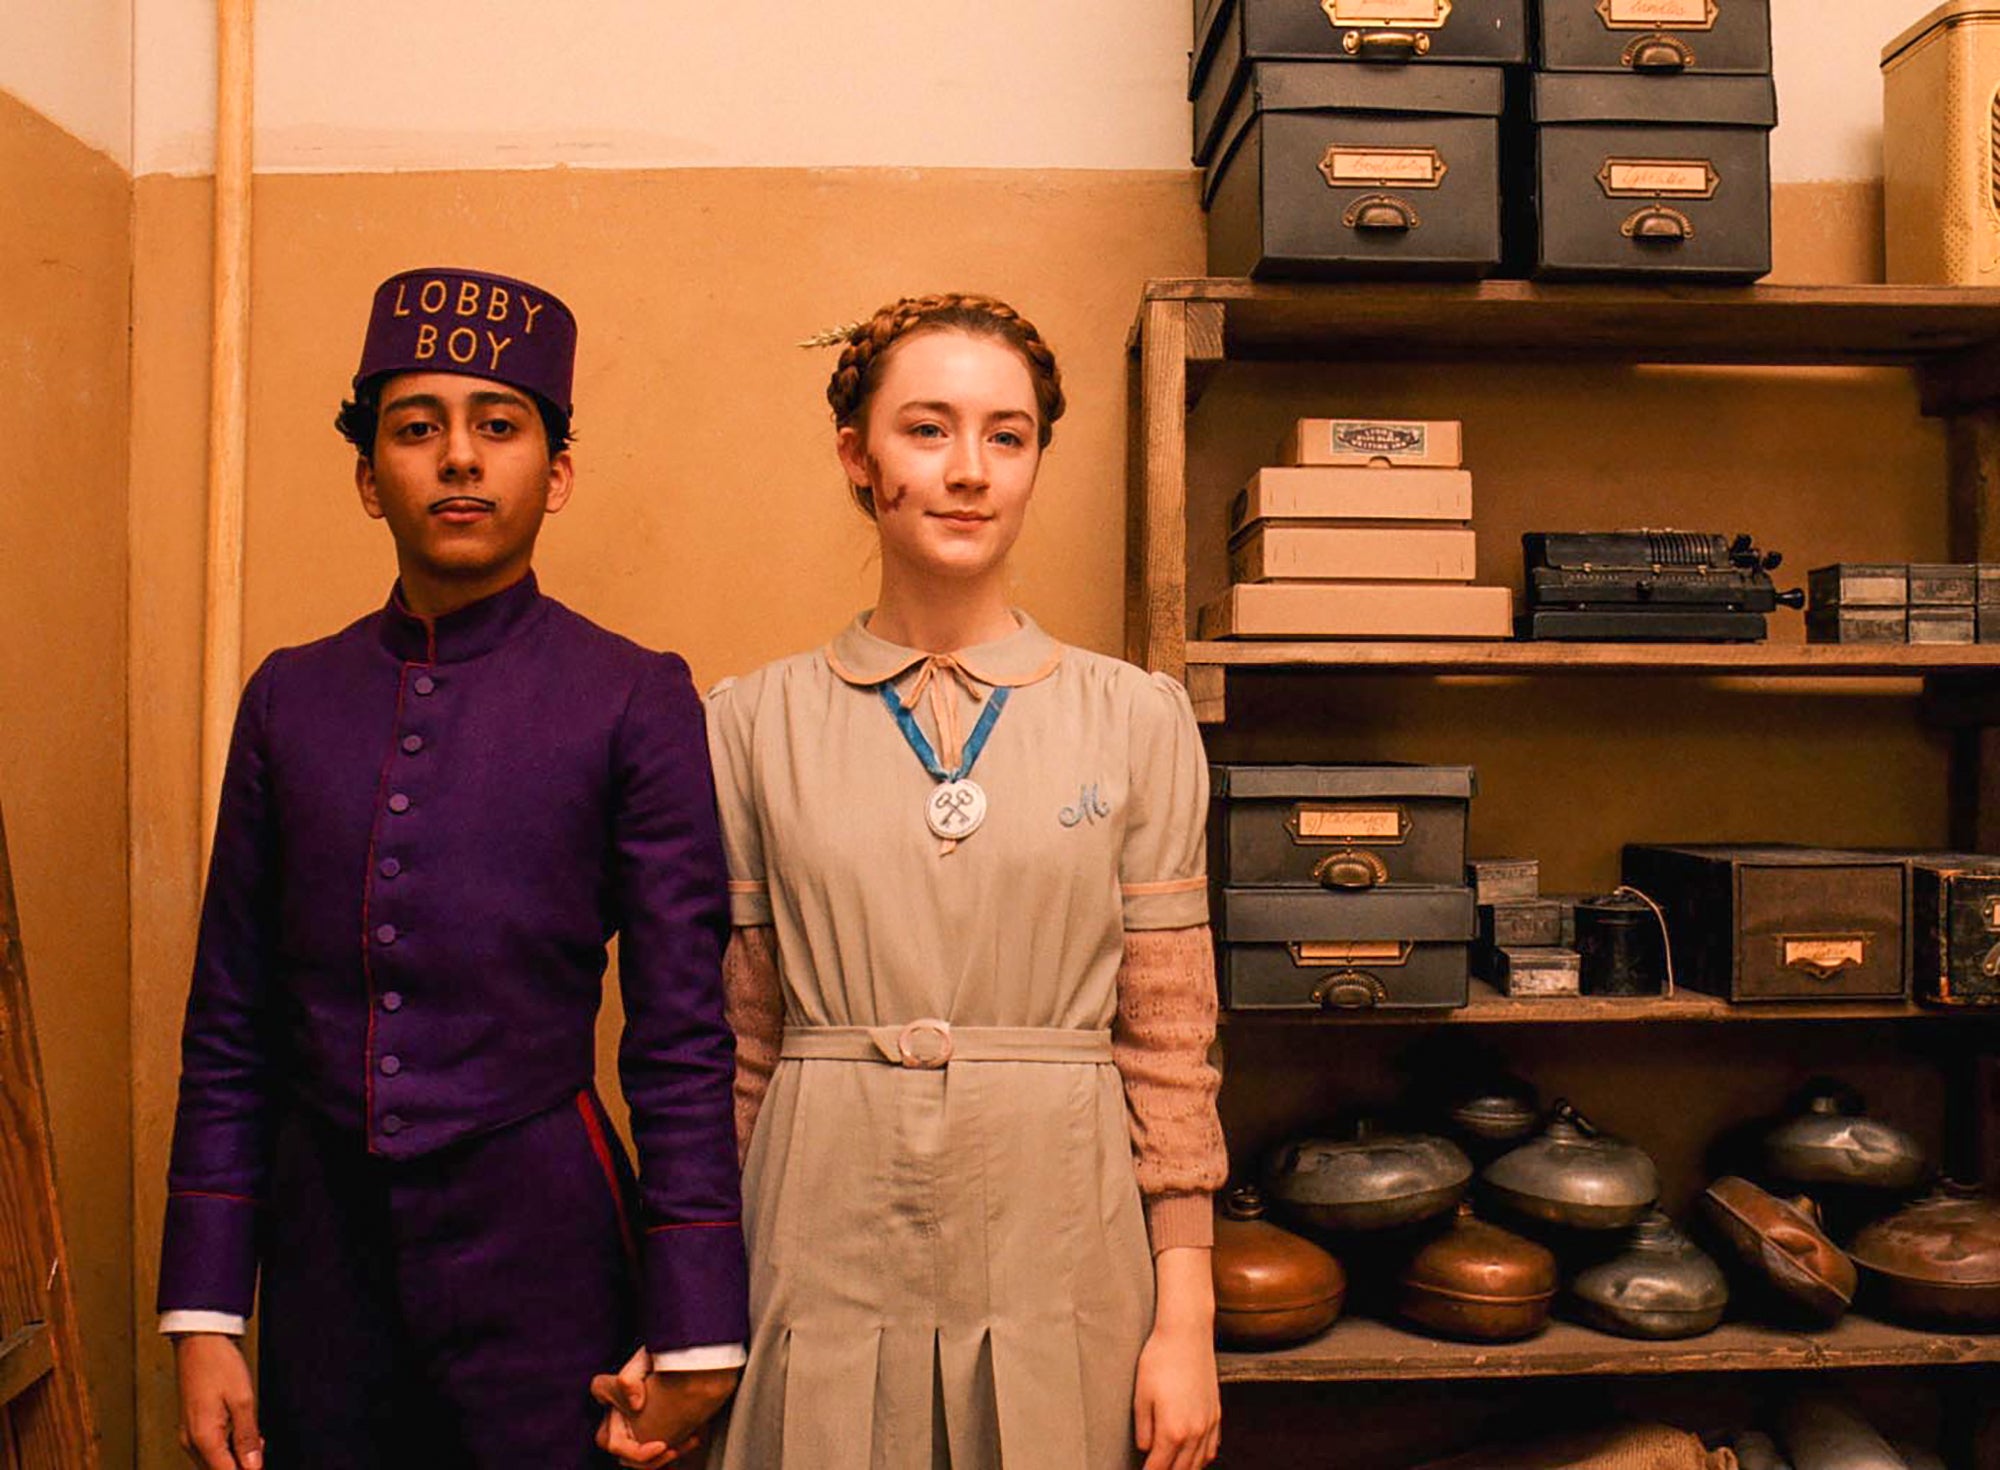 Wes Anderson Films to Watch and Stay on Trend -Social Nation